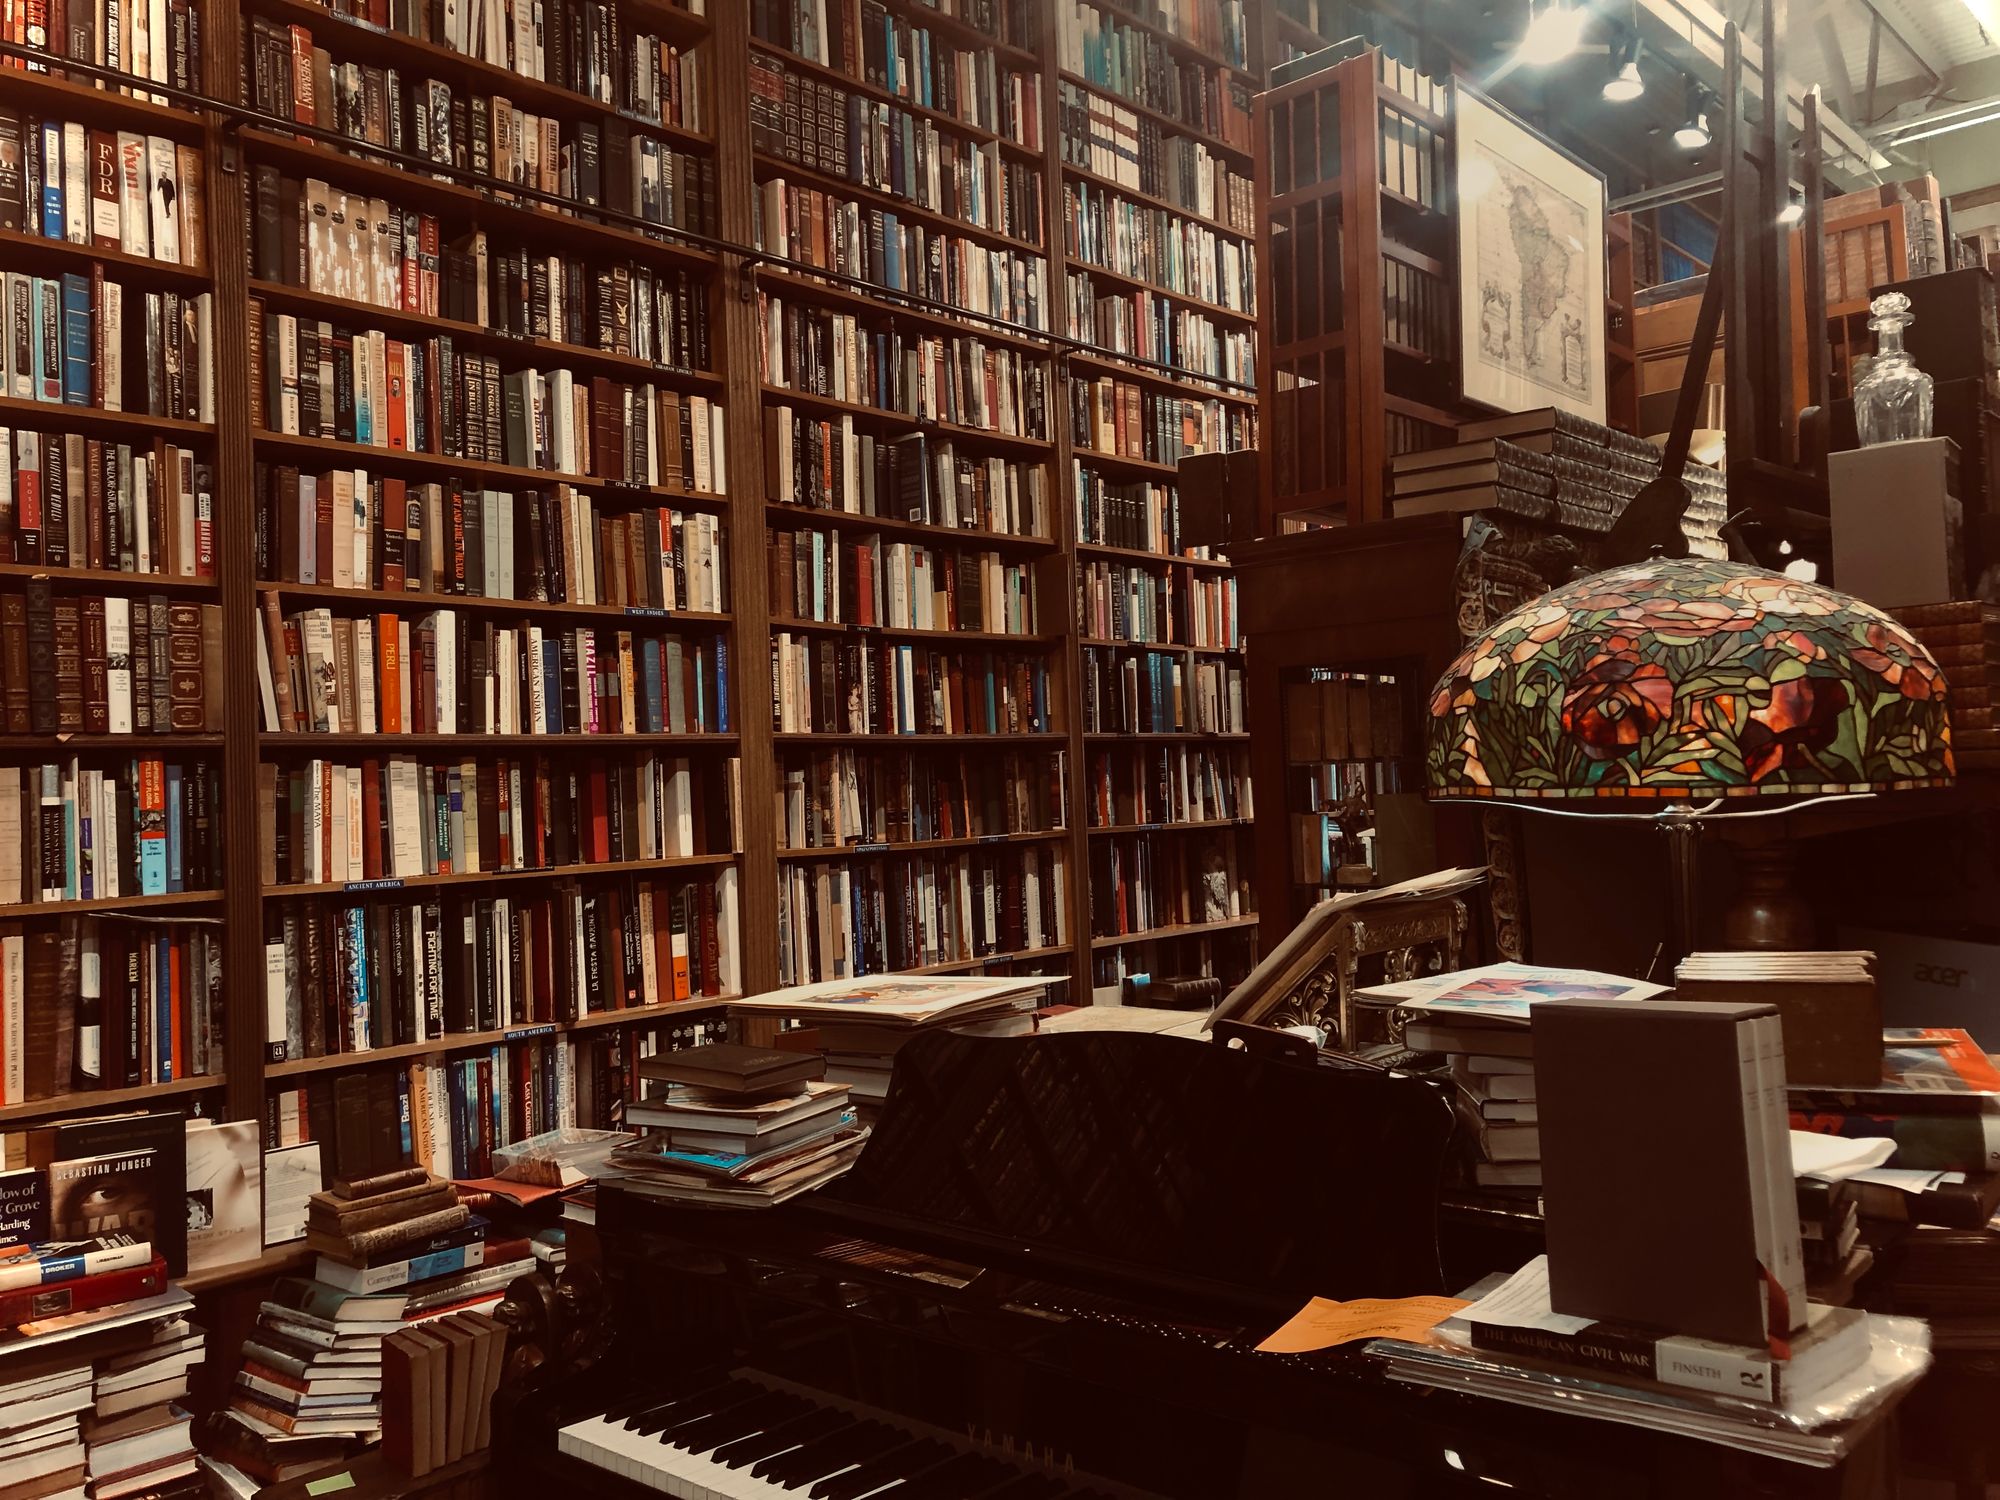 Interior of a classic bookstore with wall-to-wall wooden bookcases. Piano and antiques in the center of the room.